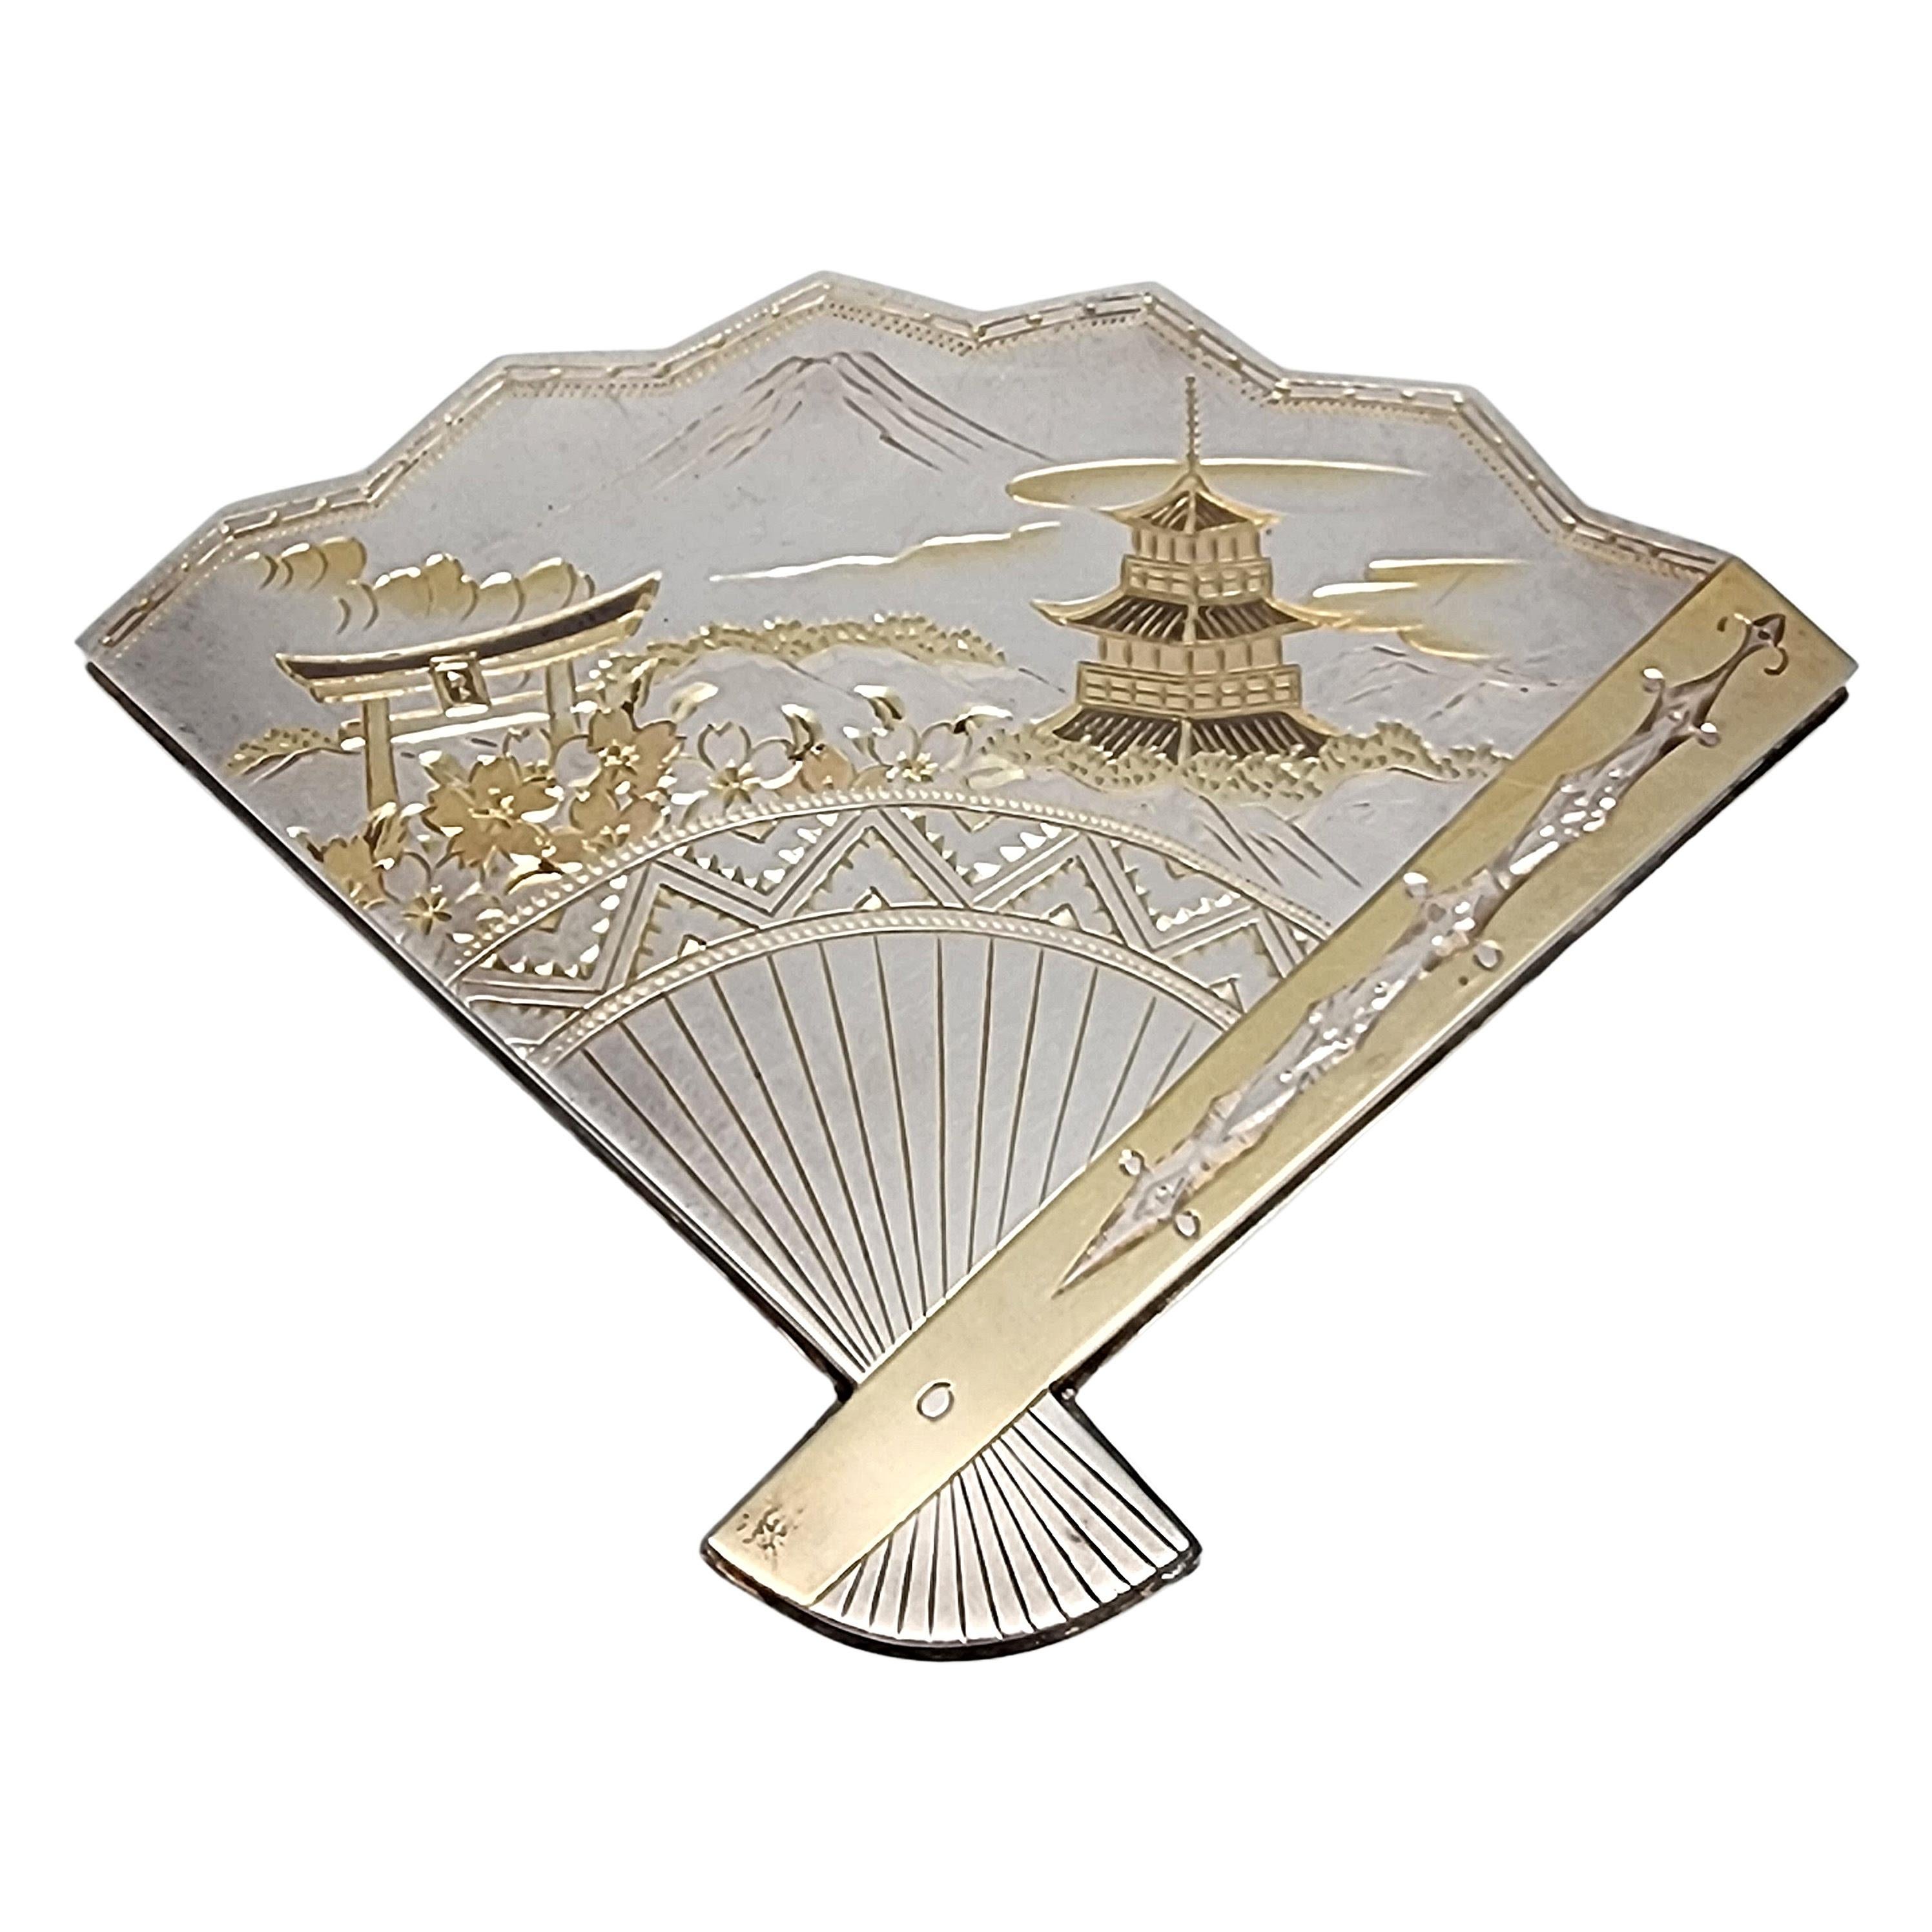 Vintage sterling silver with yellow gold accent fan mirror compact with box.

Beautiful fan shape with etched designs featuring a mountain, pagoda, Torii gate and flower scene with yellow gold accents. The back features a smooth polished design with